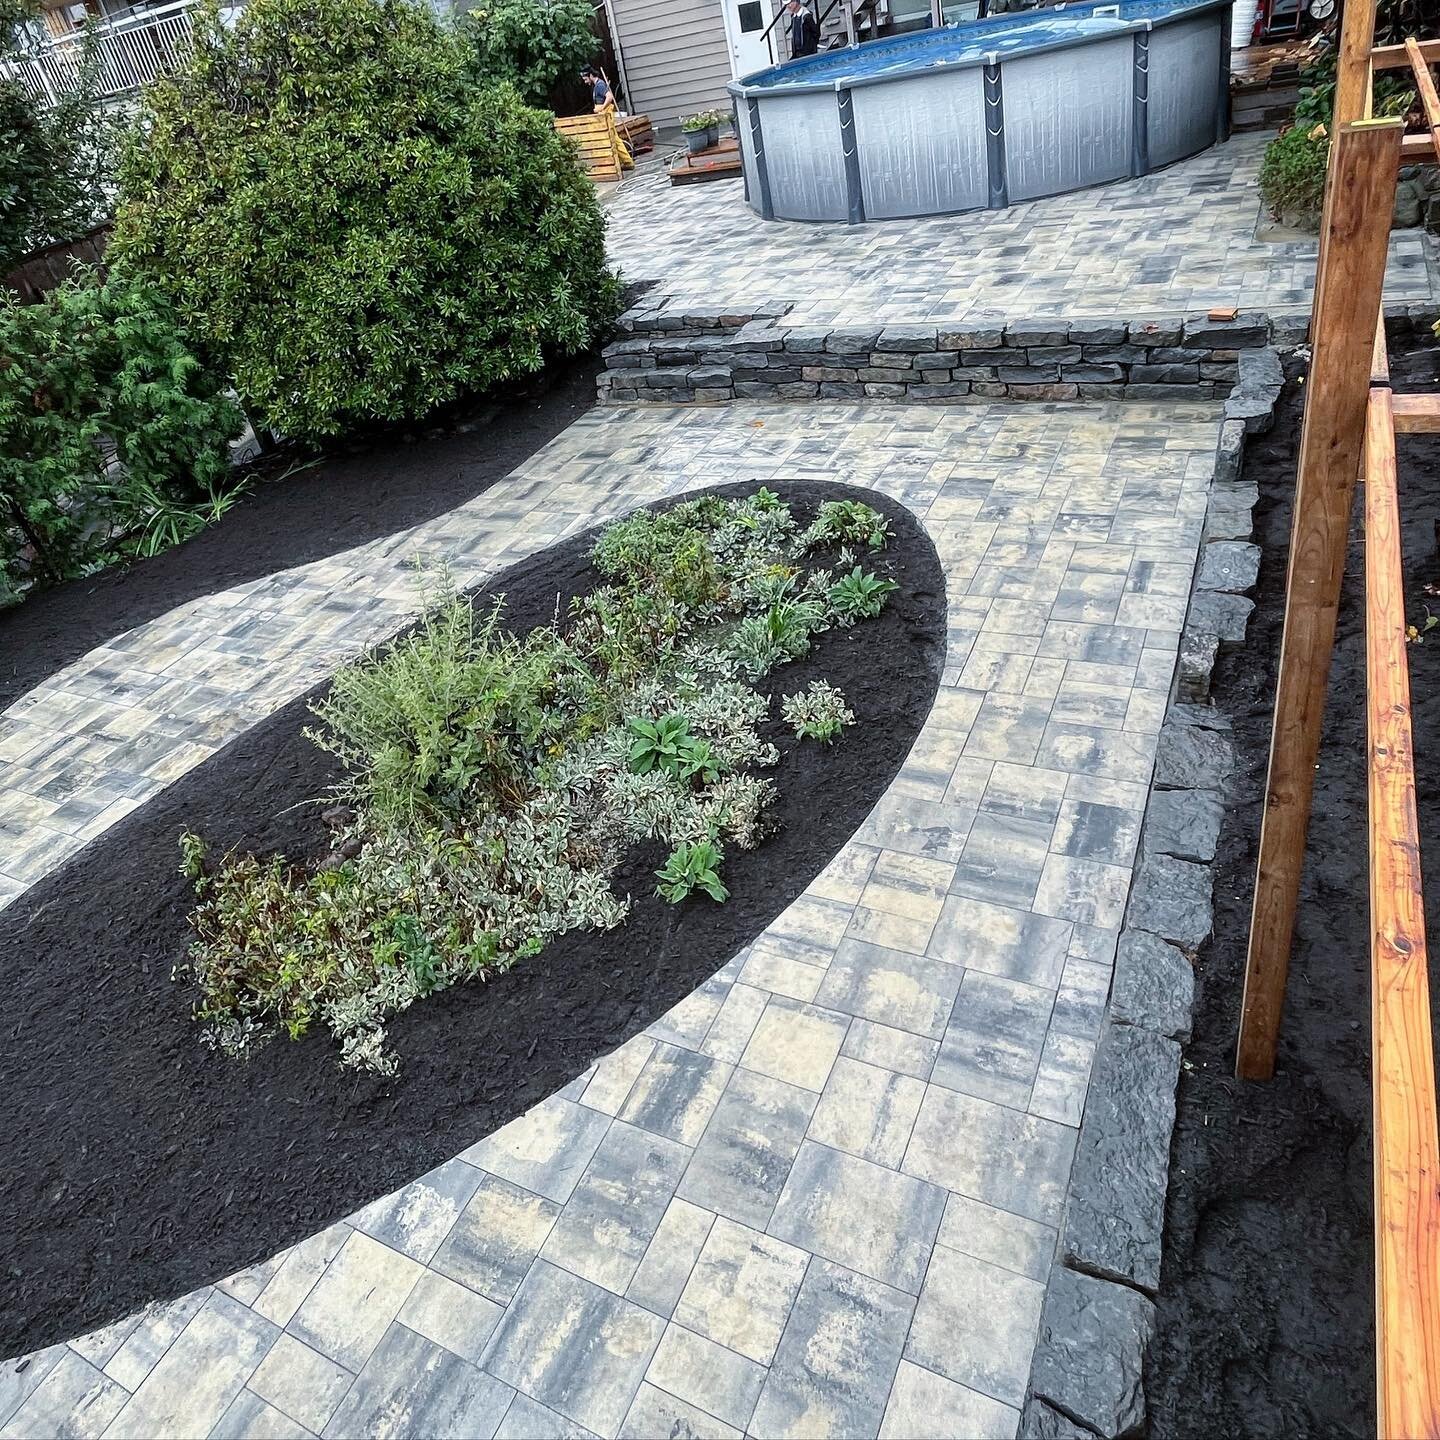 Cool little basalt wall + curved paver patio project just finished. Banged &lsquo;er out in 4 days despite the bad weather! #howtohardscape #mountainscape #pavers #pavingstones #belgard #stonemason #masonry #northvan #pnw #vancouver #northshore #lons